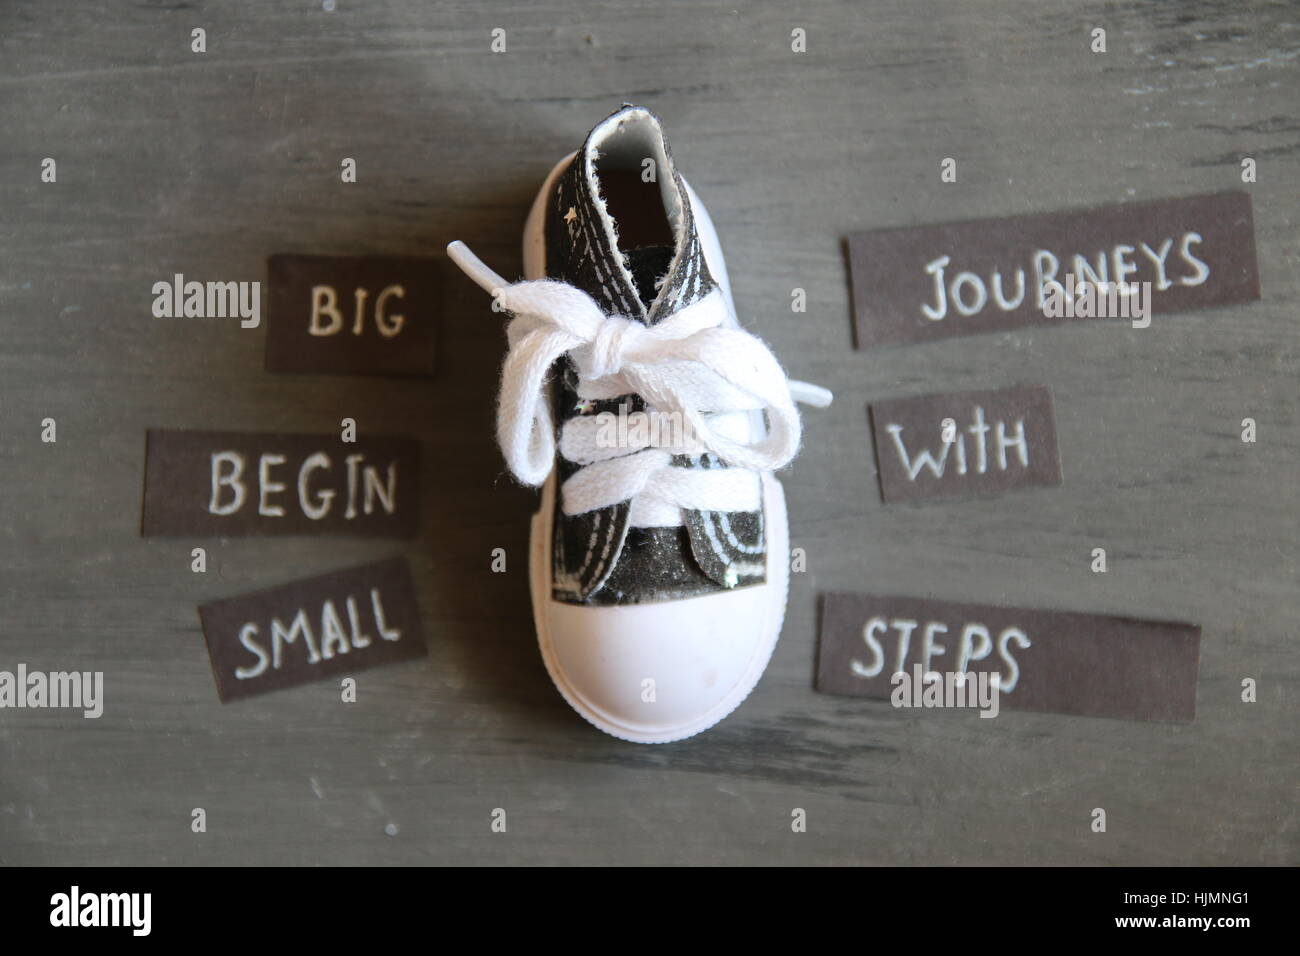 Big journeys begin with small steps, retro style Stock Photo